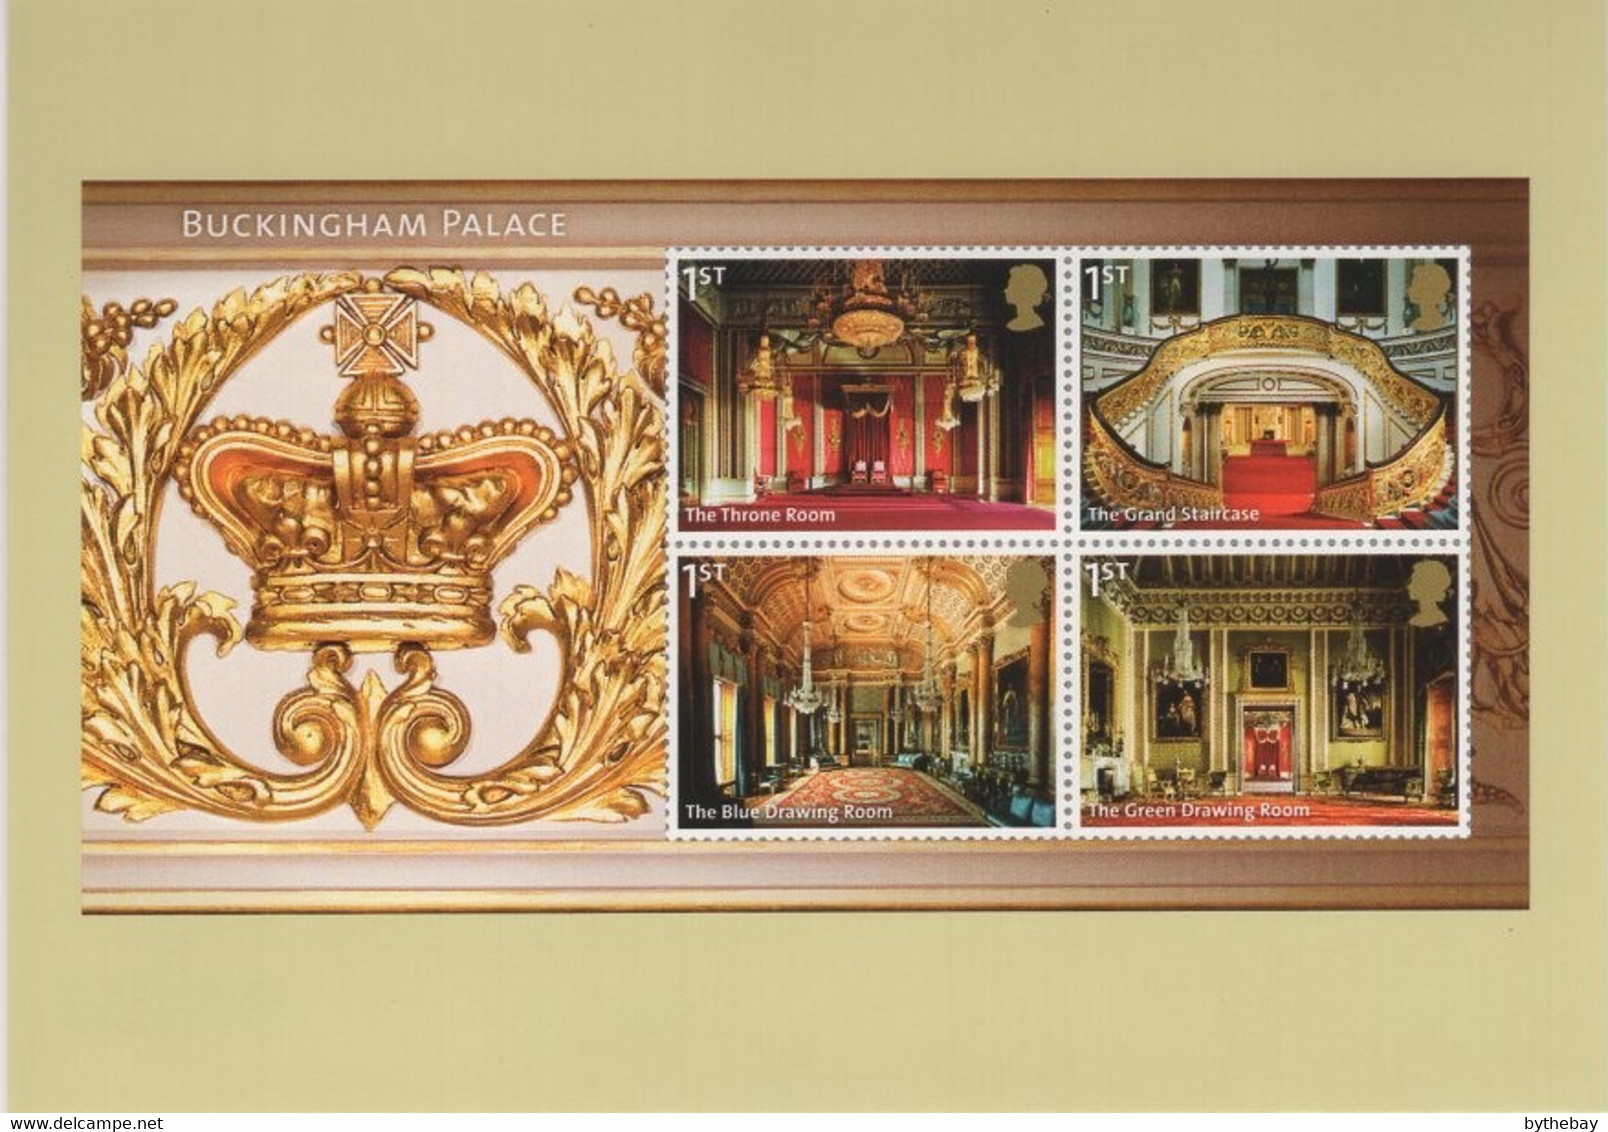 Great Britain 2014 PHQ Card Sc 3285 1st Rooms In Buckingham Palace - PHQ Cards